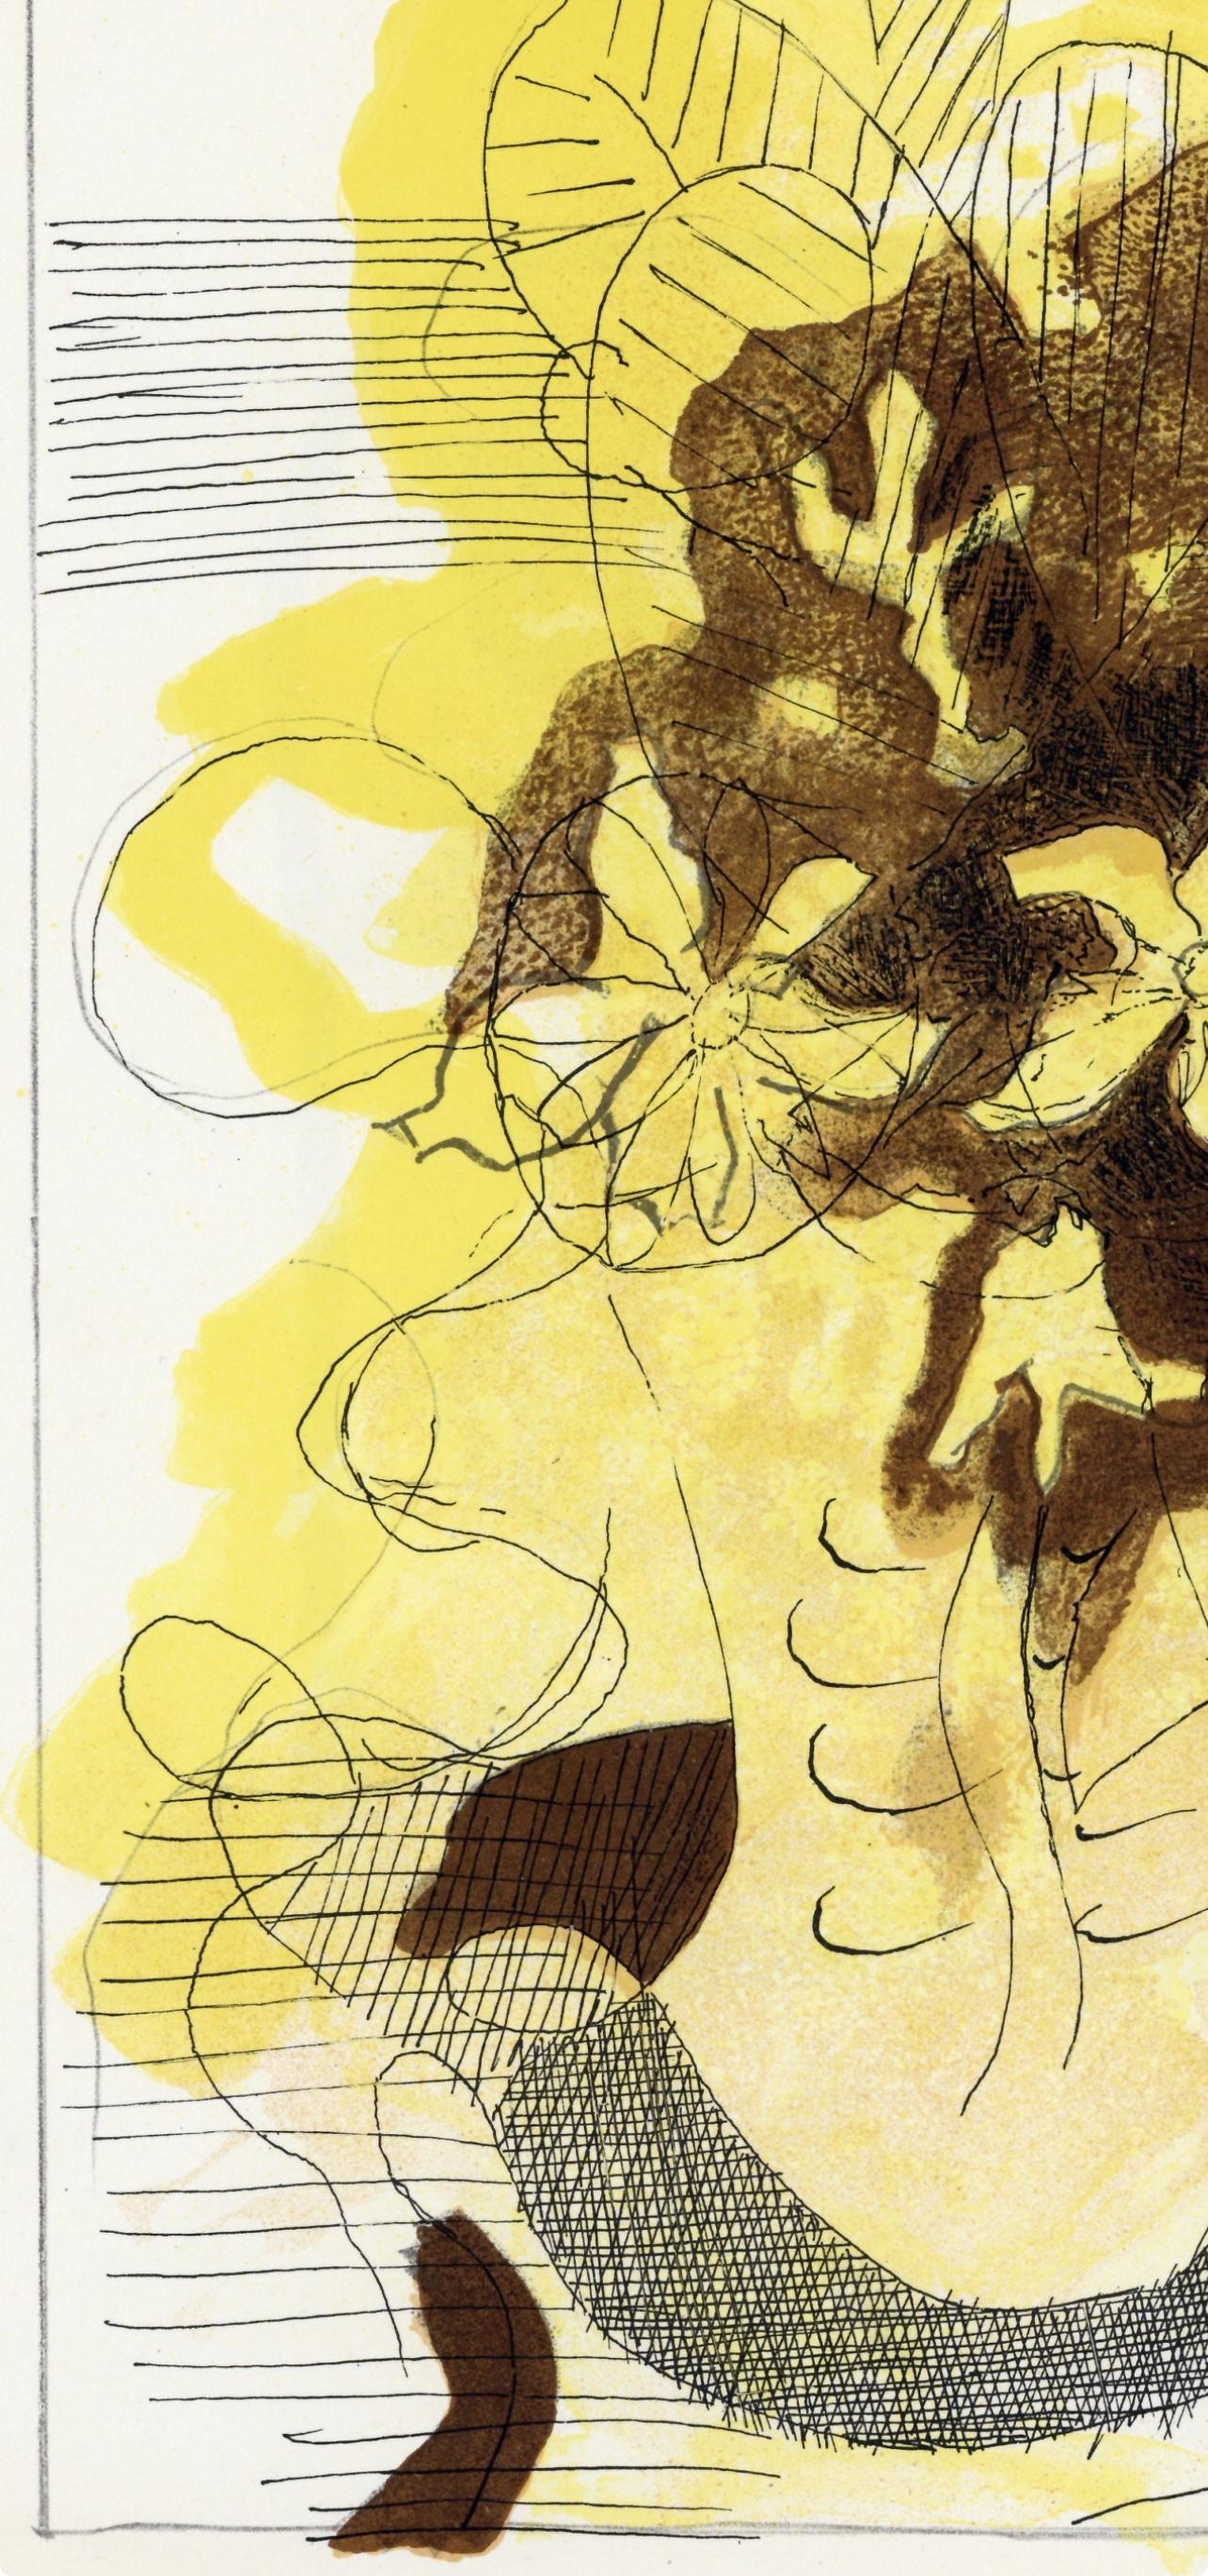 Lithograph on vélin du Marais paper. Inscription: Unsigned and unnumbered, as issued. Good condition. Notes: From the volume, The Intimate Sketchbooks of G. Braque, Verve: Revue Artistique et Littéraire, Vol. VIII, N° 31-32, 1955. Published by